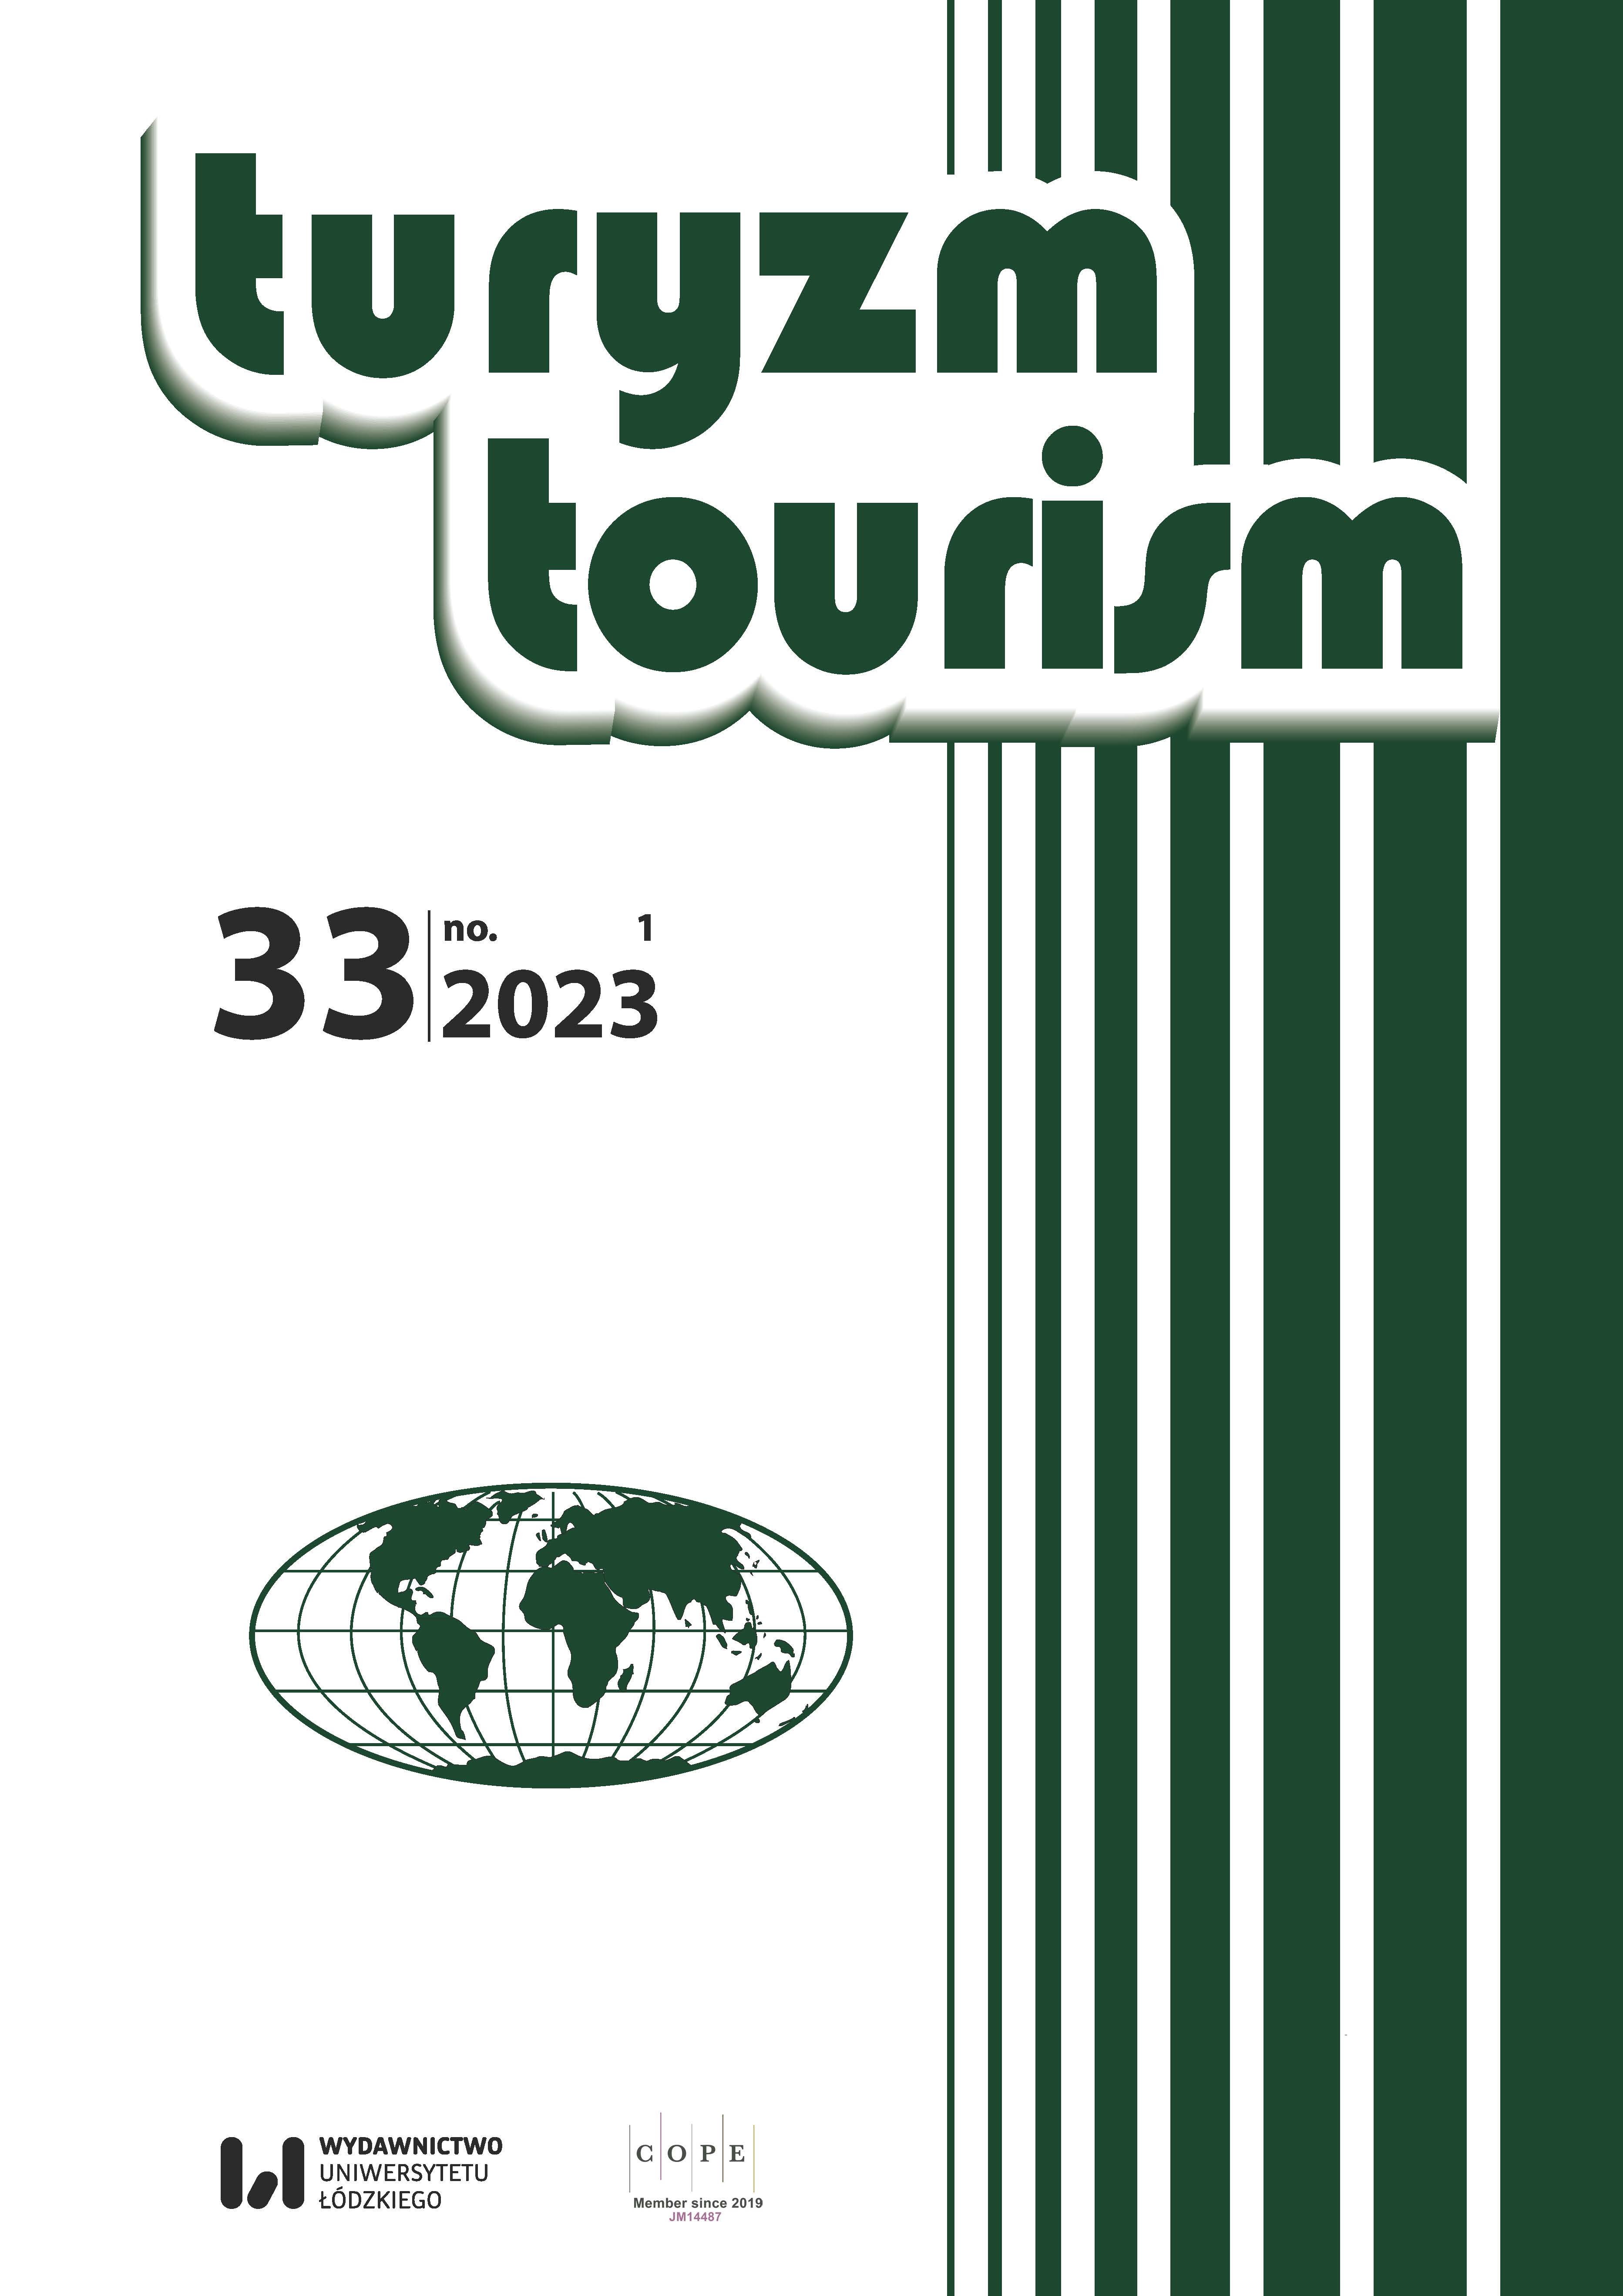 Revisiting perceived determinants of tourism destination competitiveness among tourists: The case of national parks in Sarawak, Malaysia